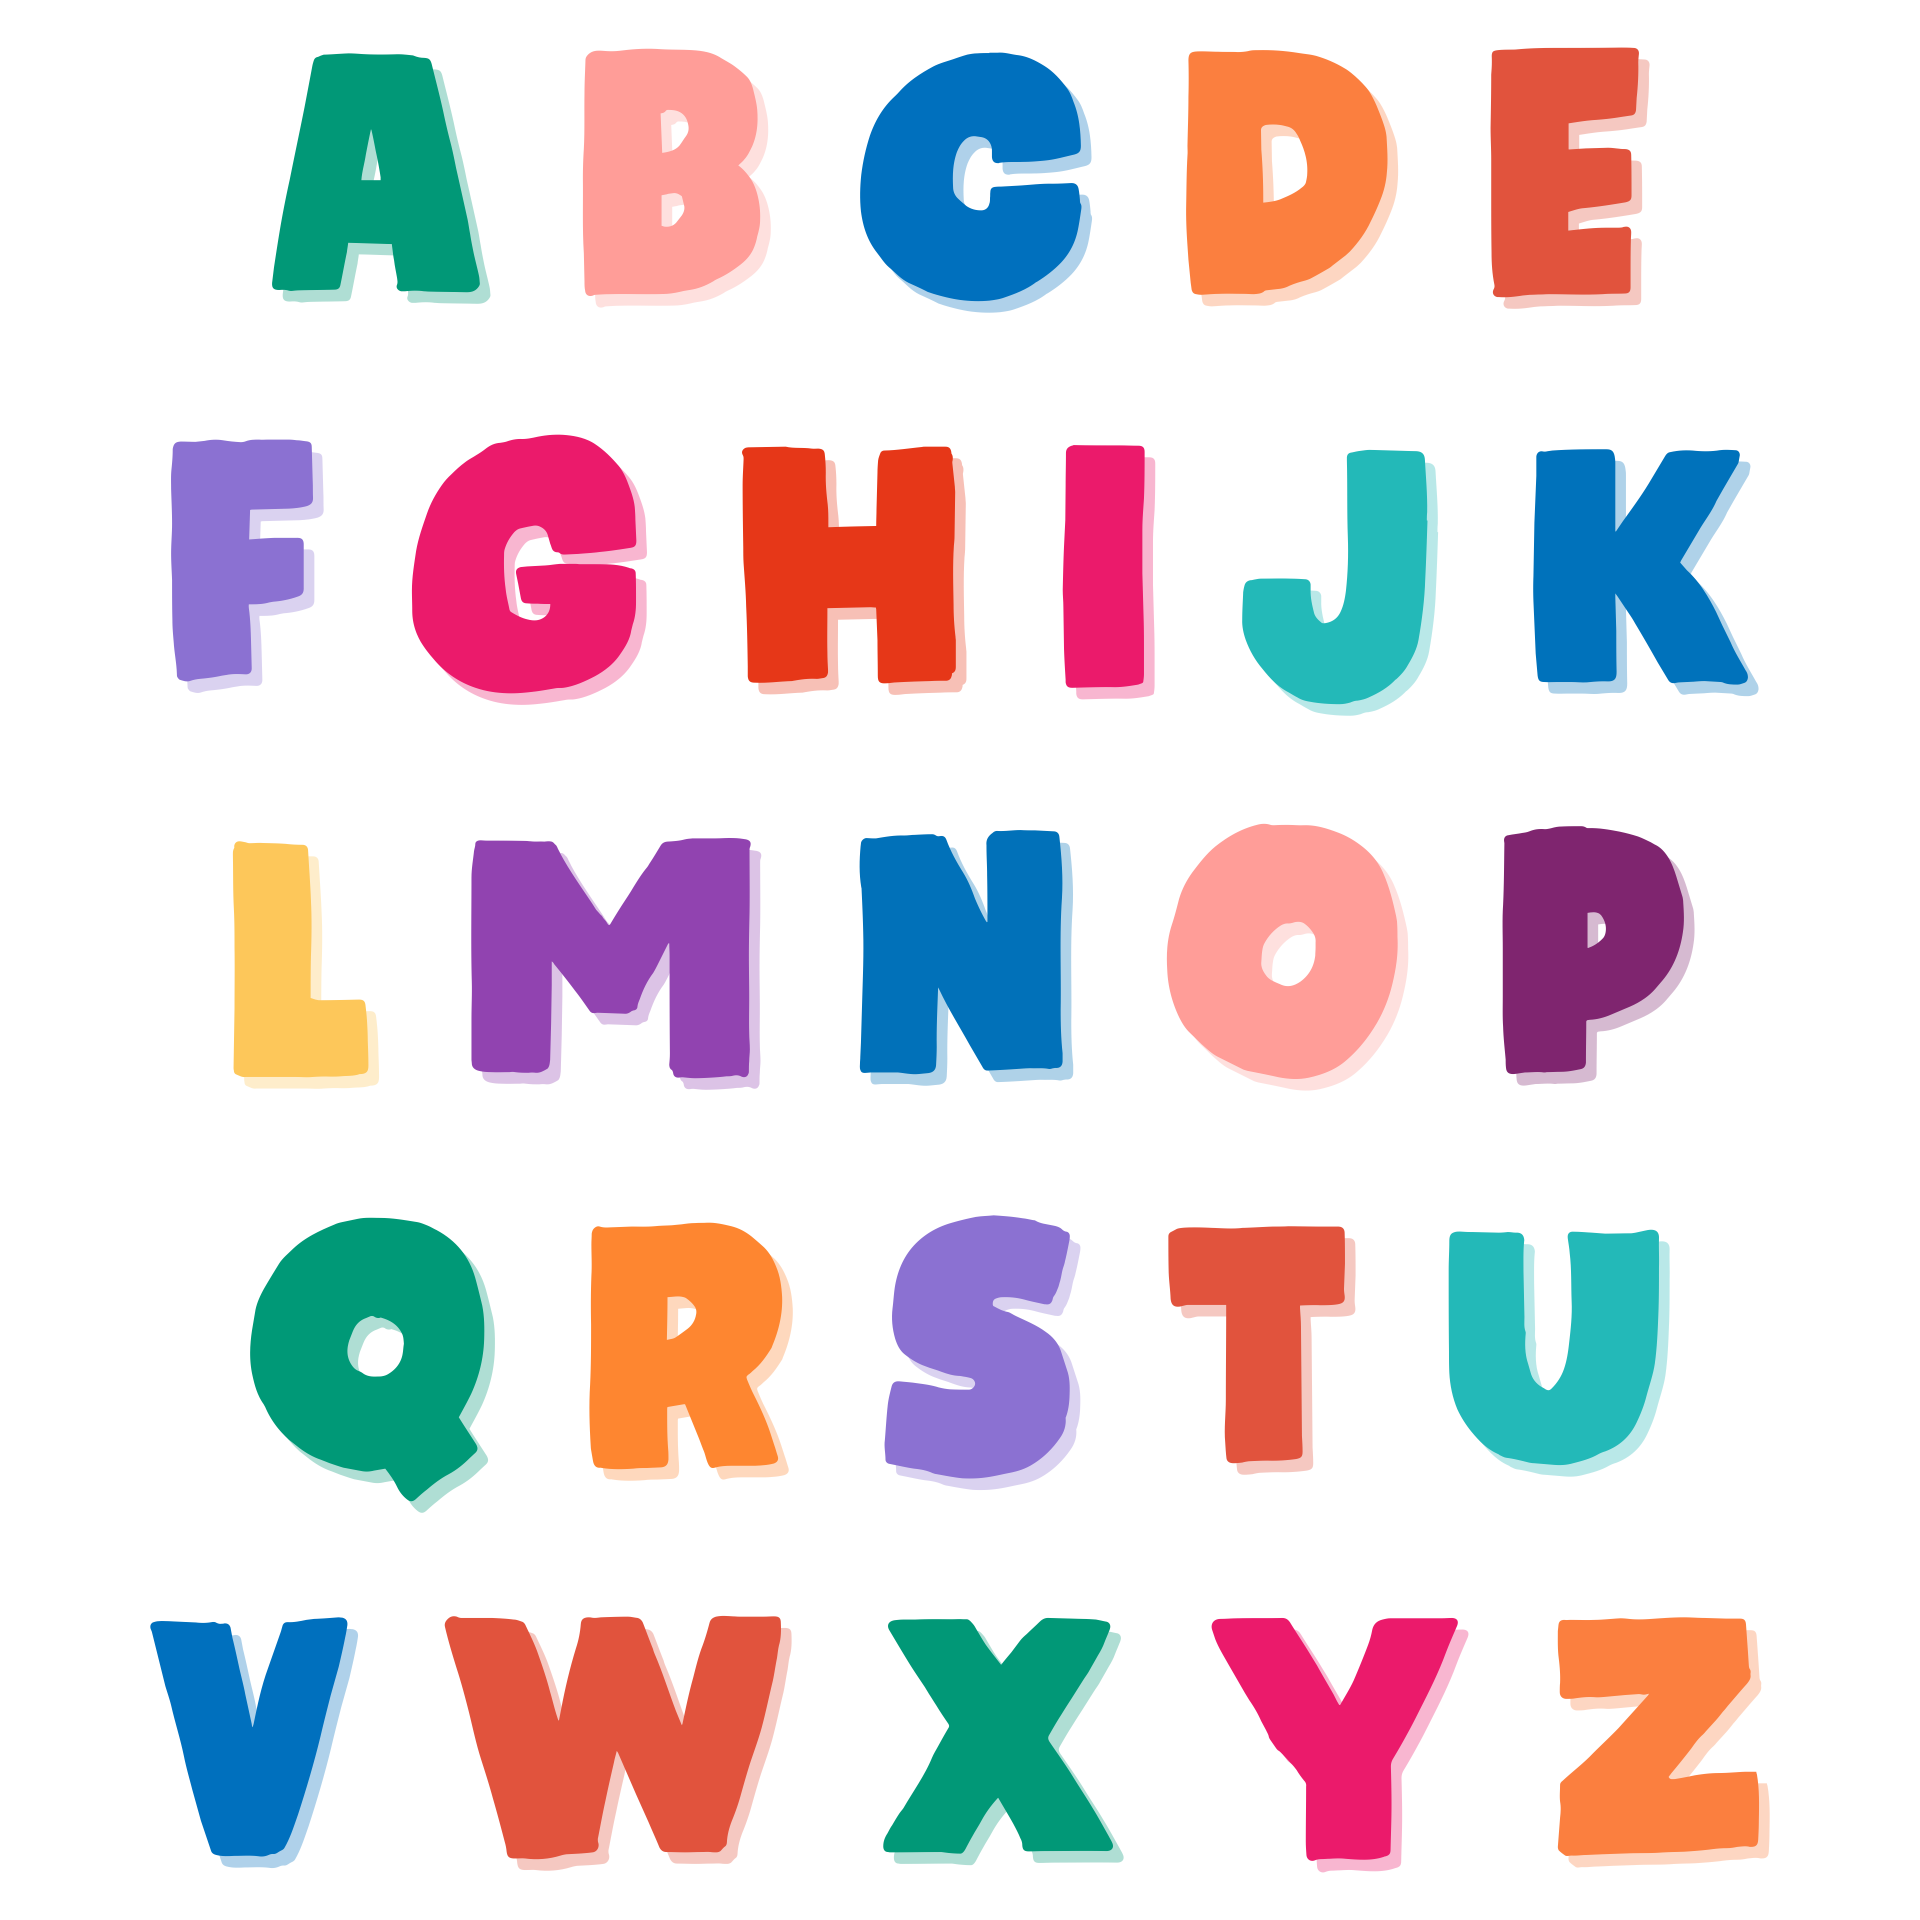 Individual Colorful Alphabet Letters Printable